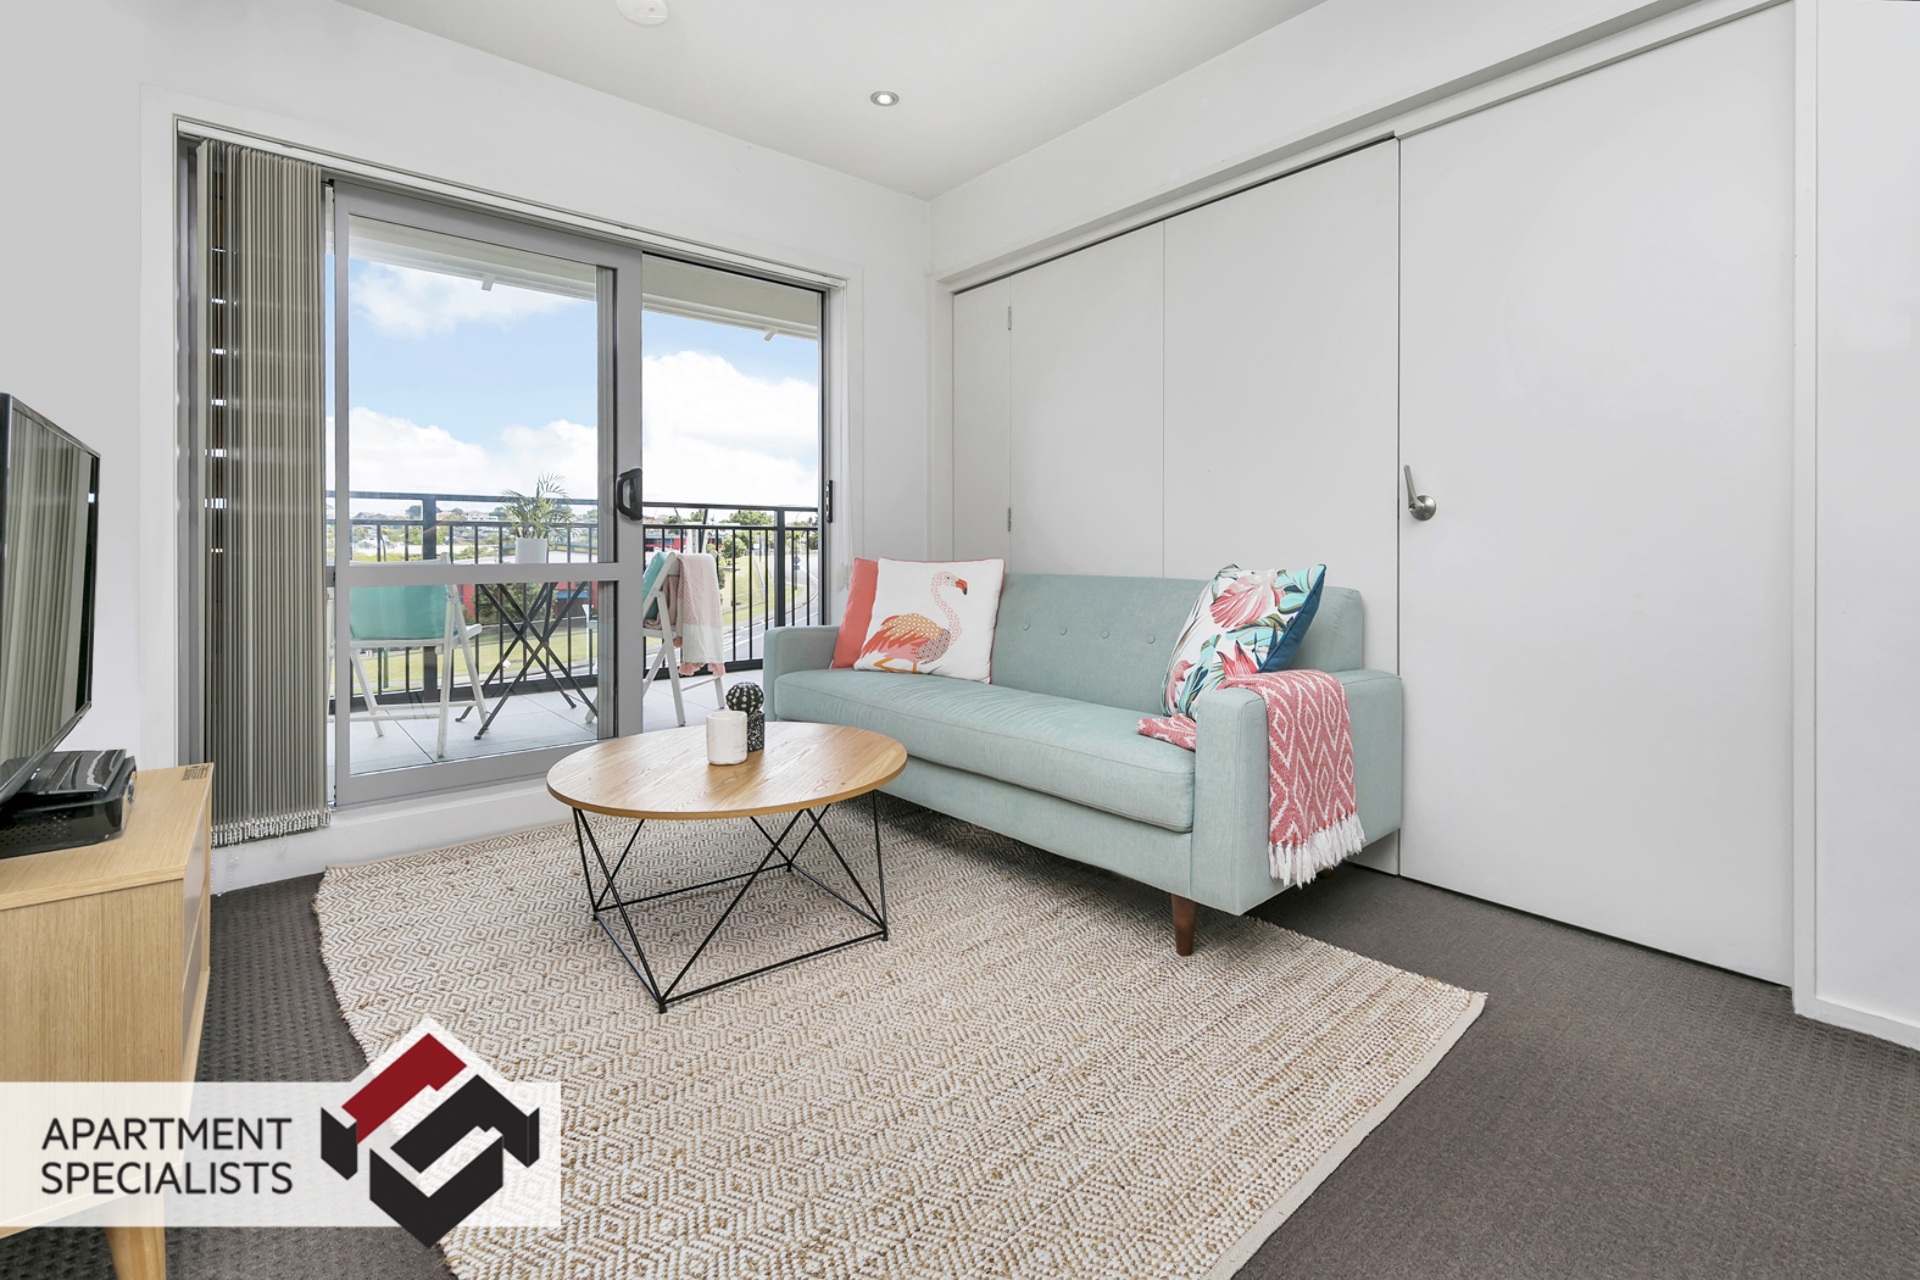 1 | 71 Spencer Road, Albany | Apartment Specialists